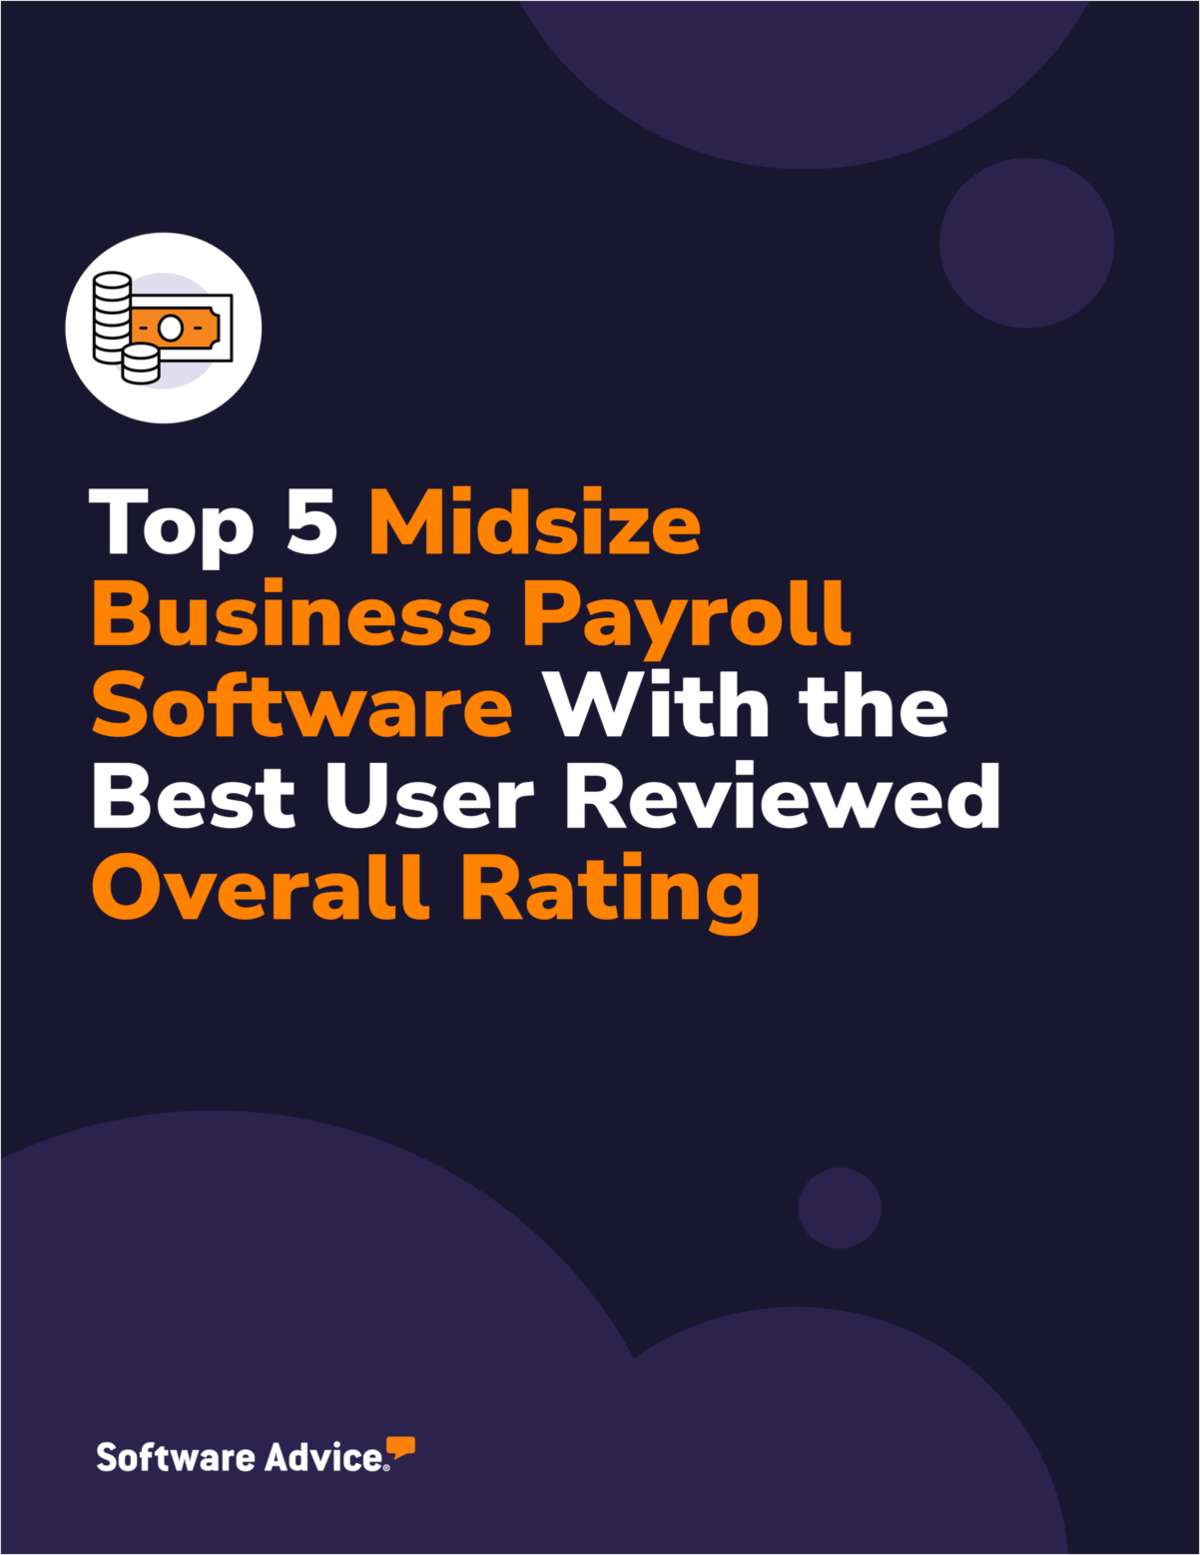 Top 5 Midsize Business Payroll Software With the Best User Reviewed Overall Rating